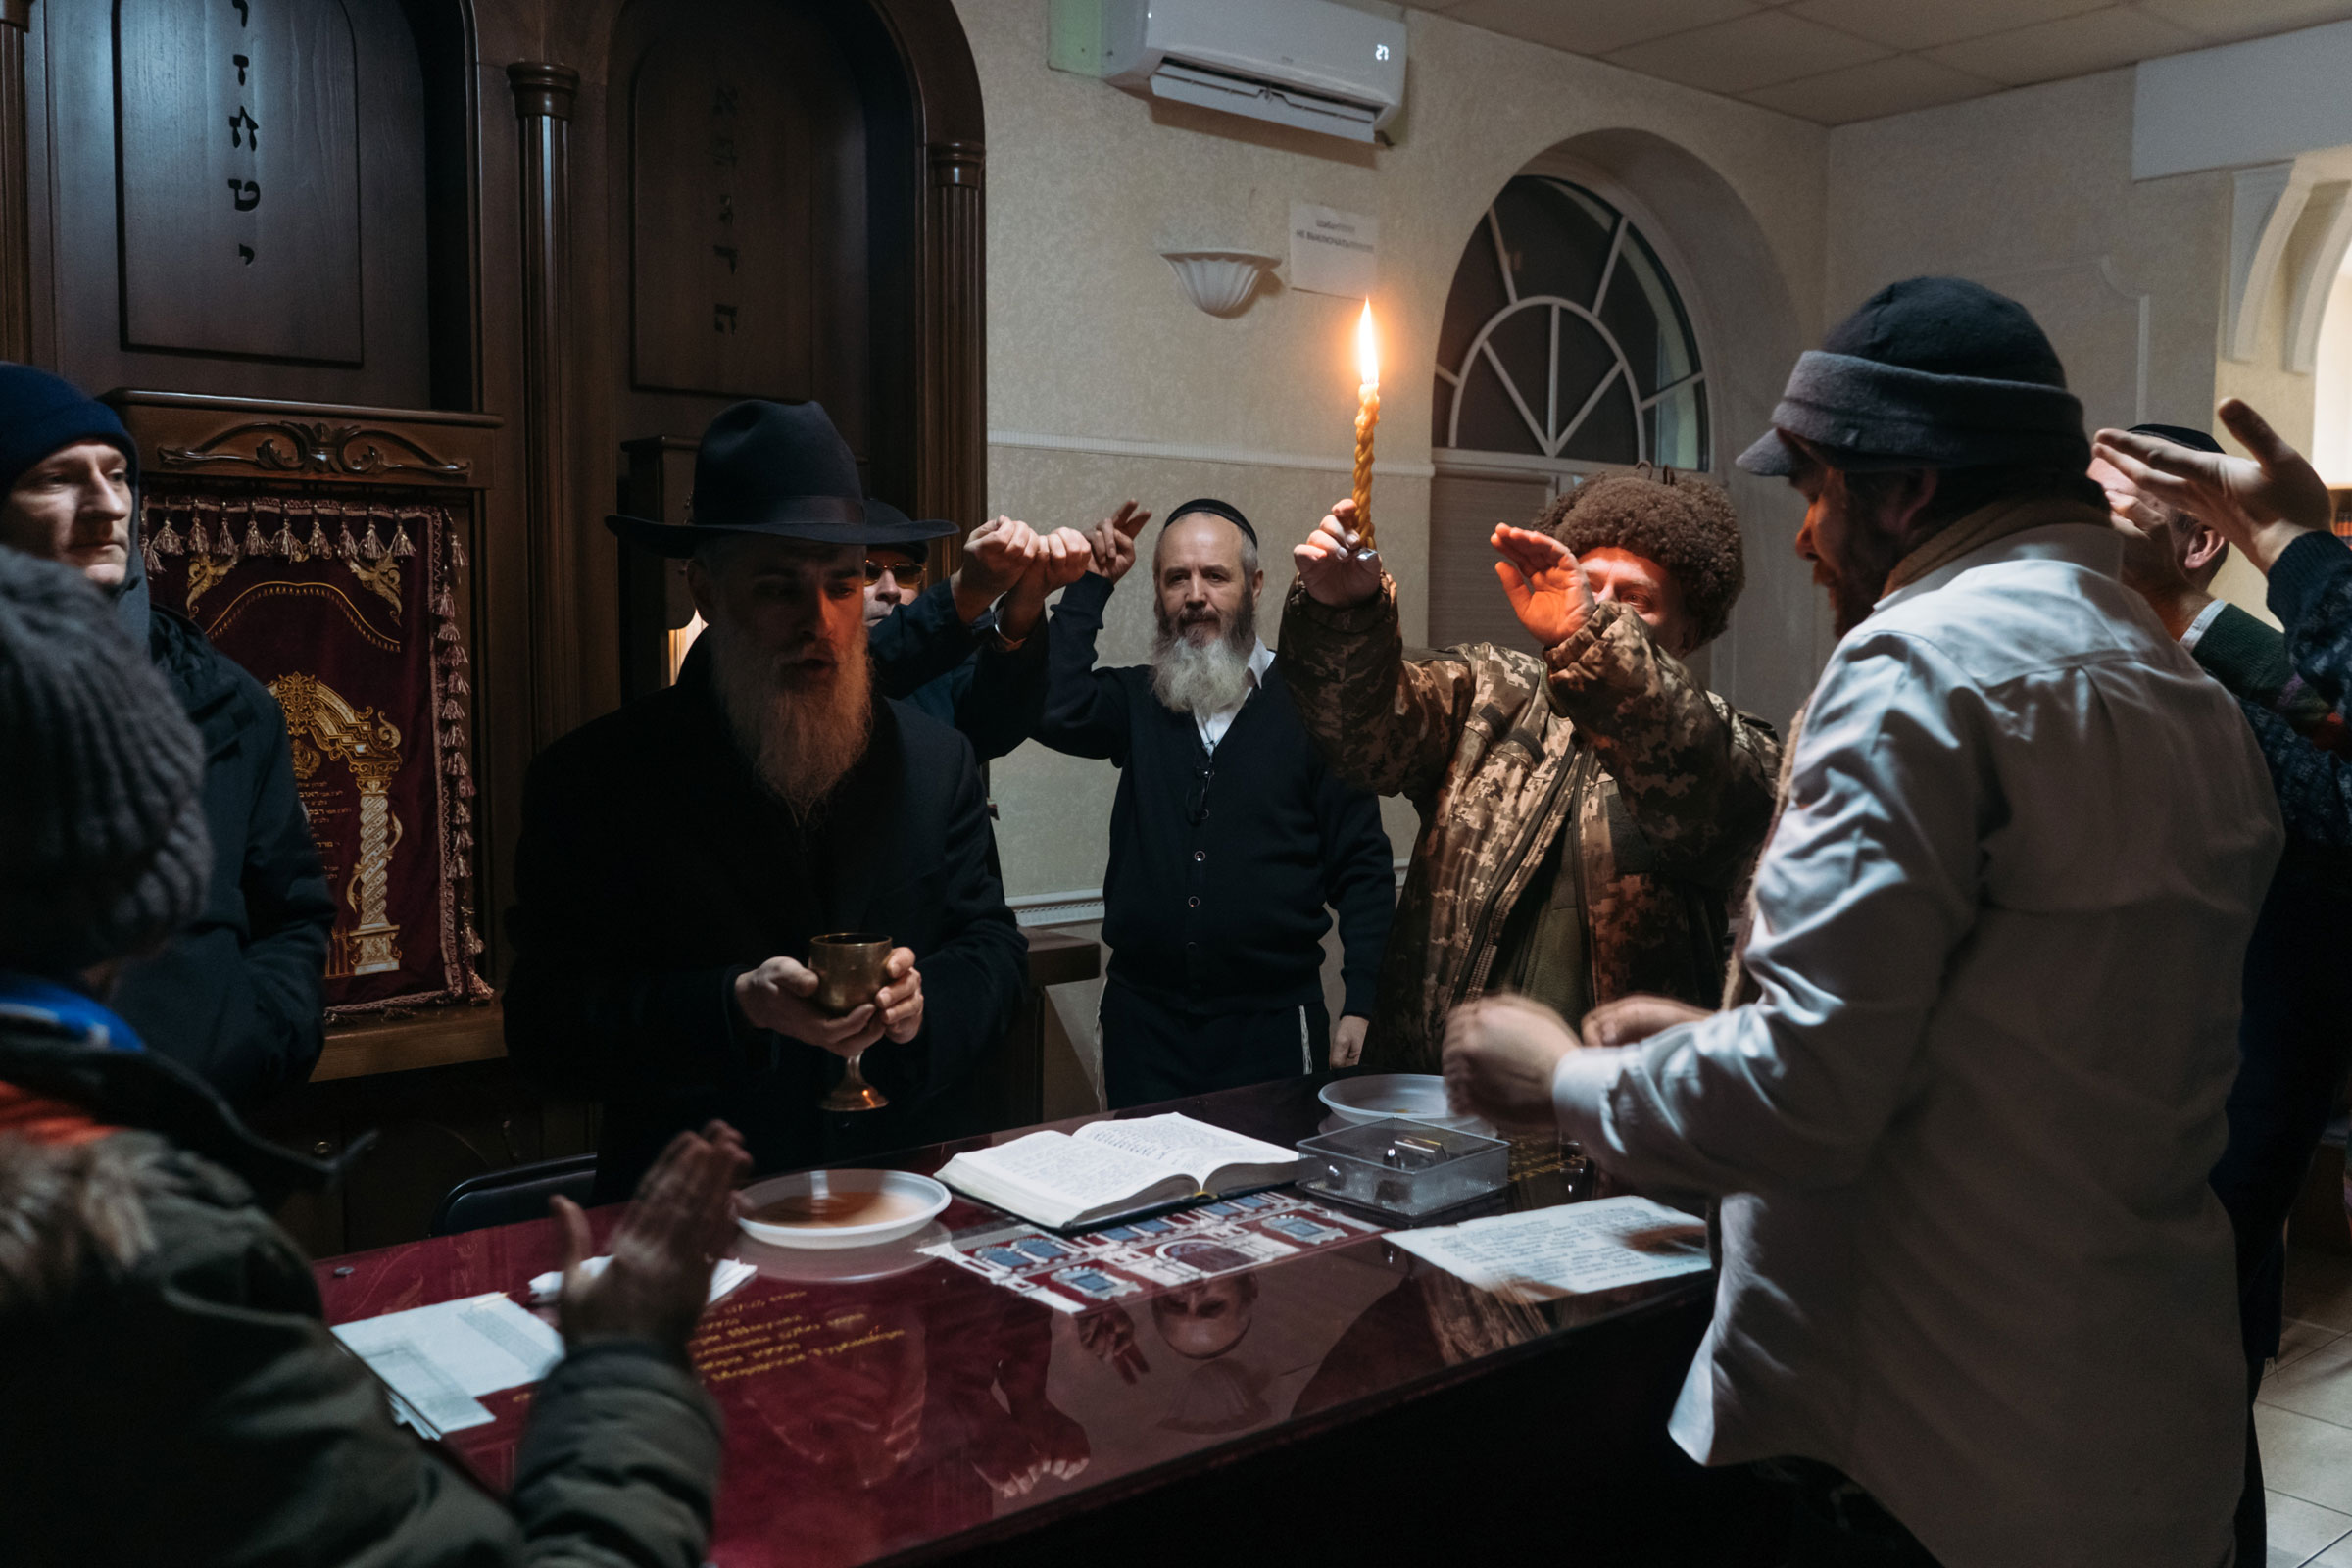 Rabbi David Goldich blesses the wine during sabbath prayer at the Great Choral Synagogue in Kyiv on Dec. 10, 2022. (Anastasia Vlasova—The Washington Post/Getty Images)